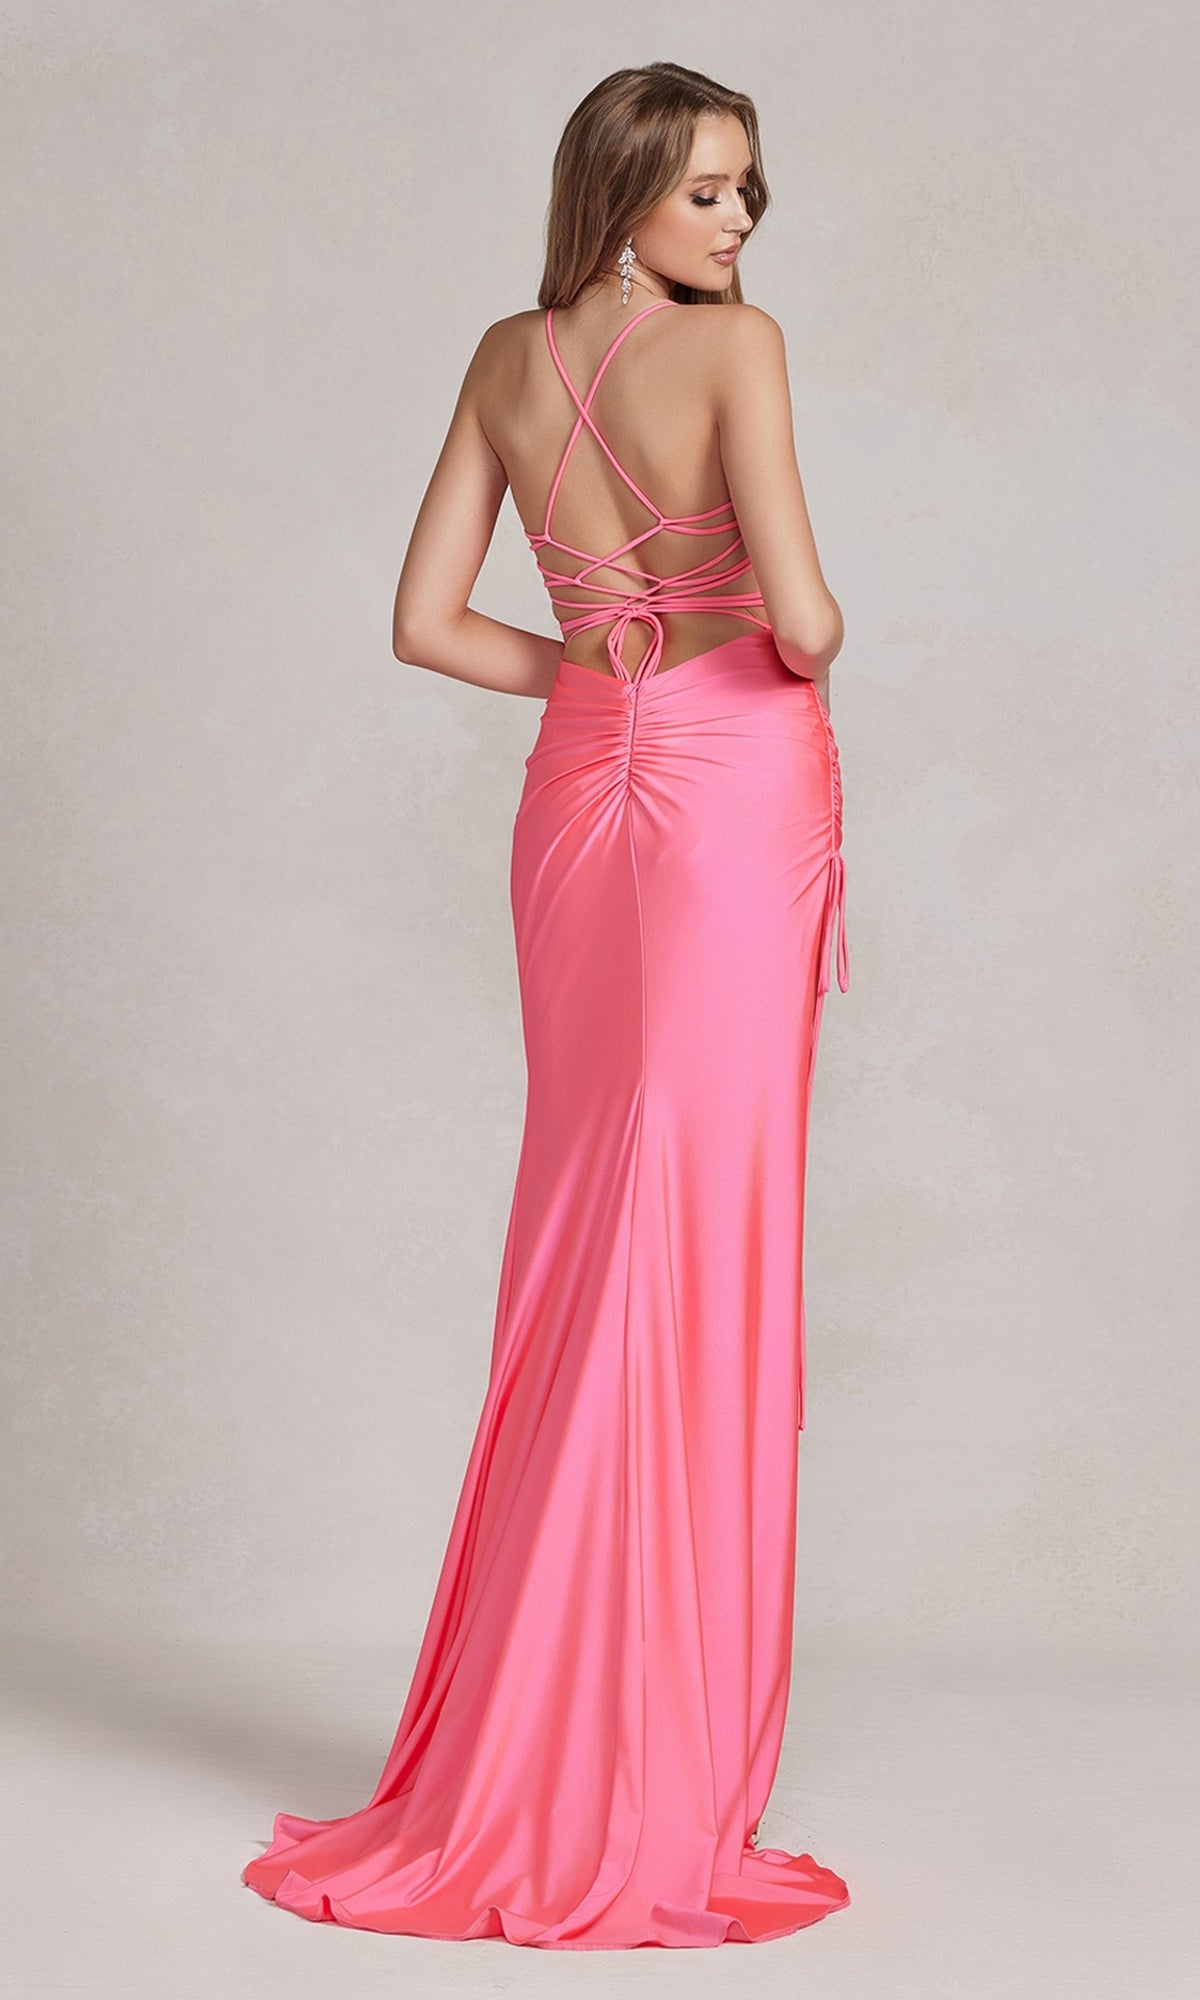 Strappy-Back Affordable Long Prom Dress